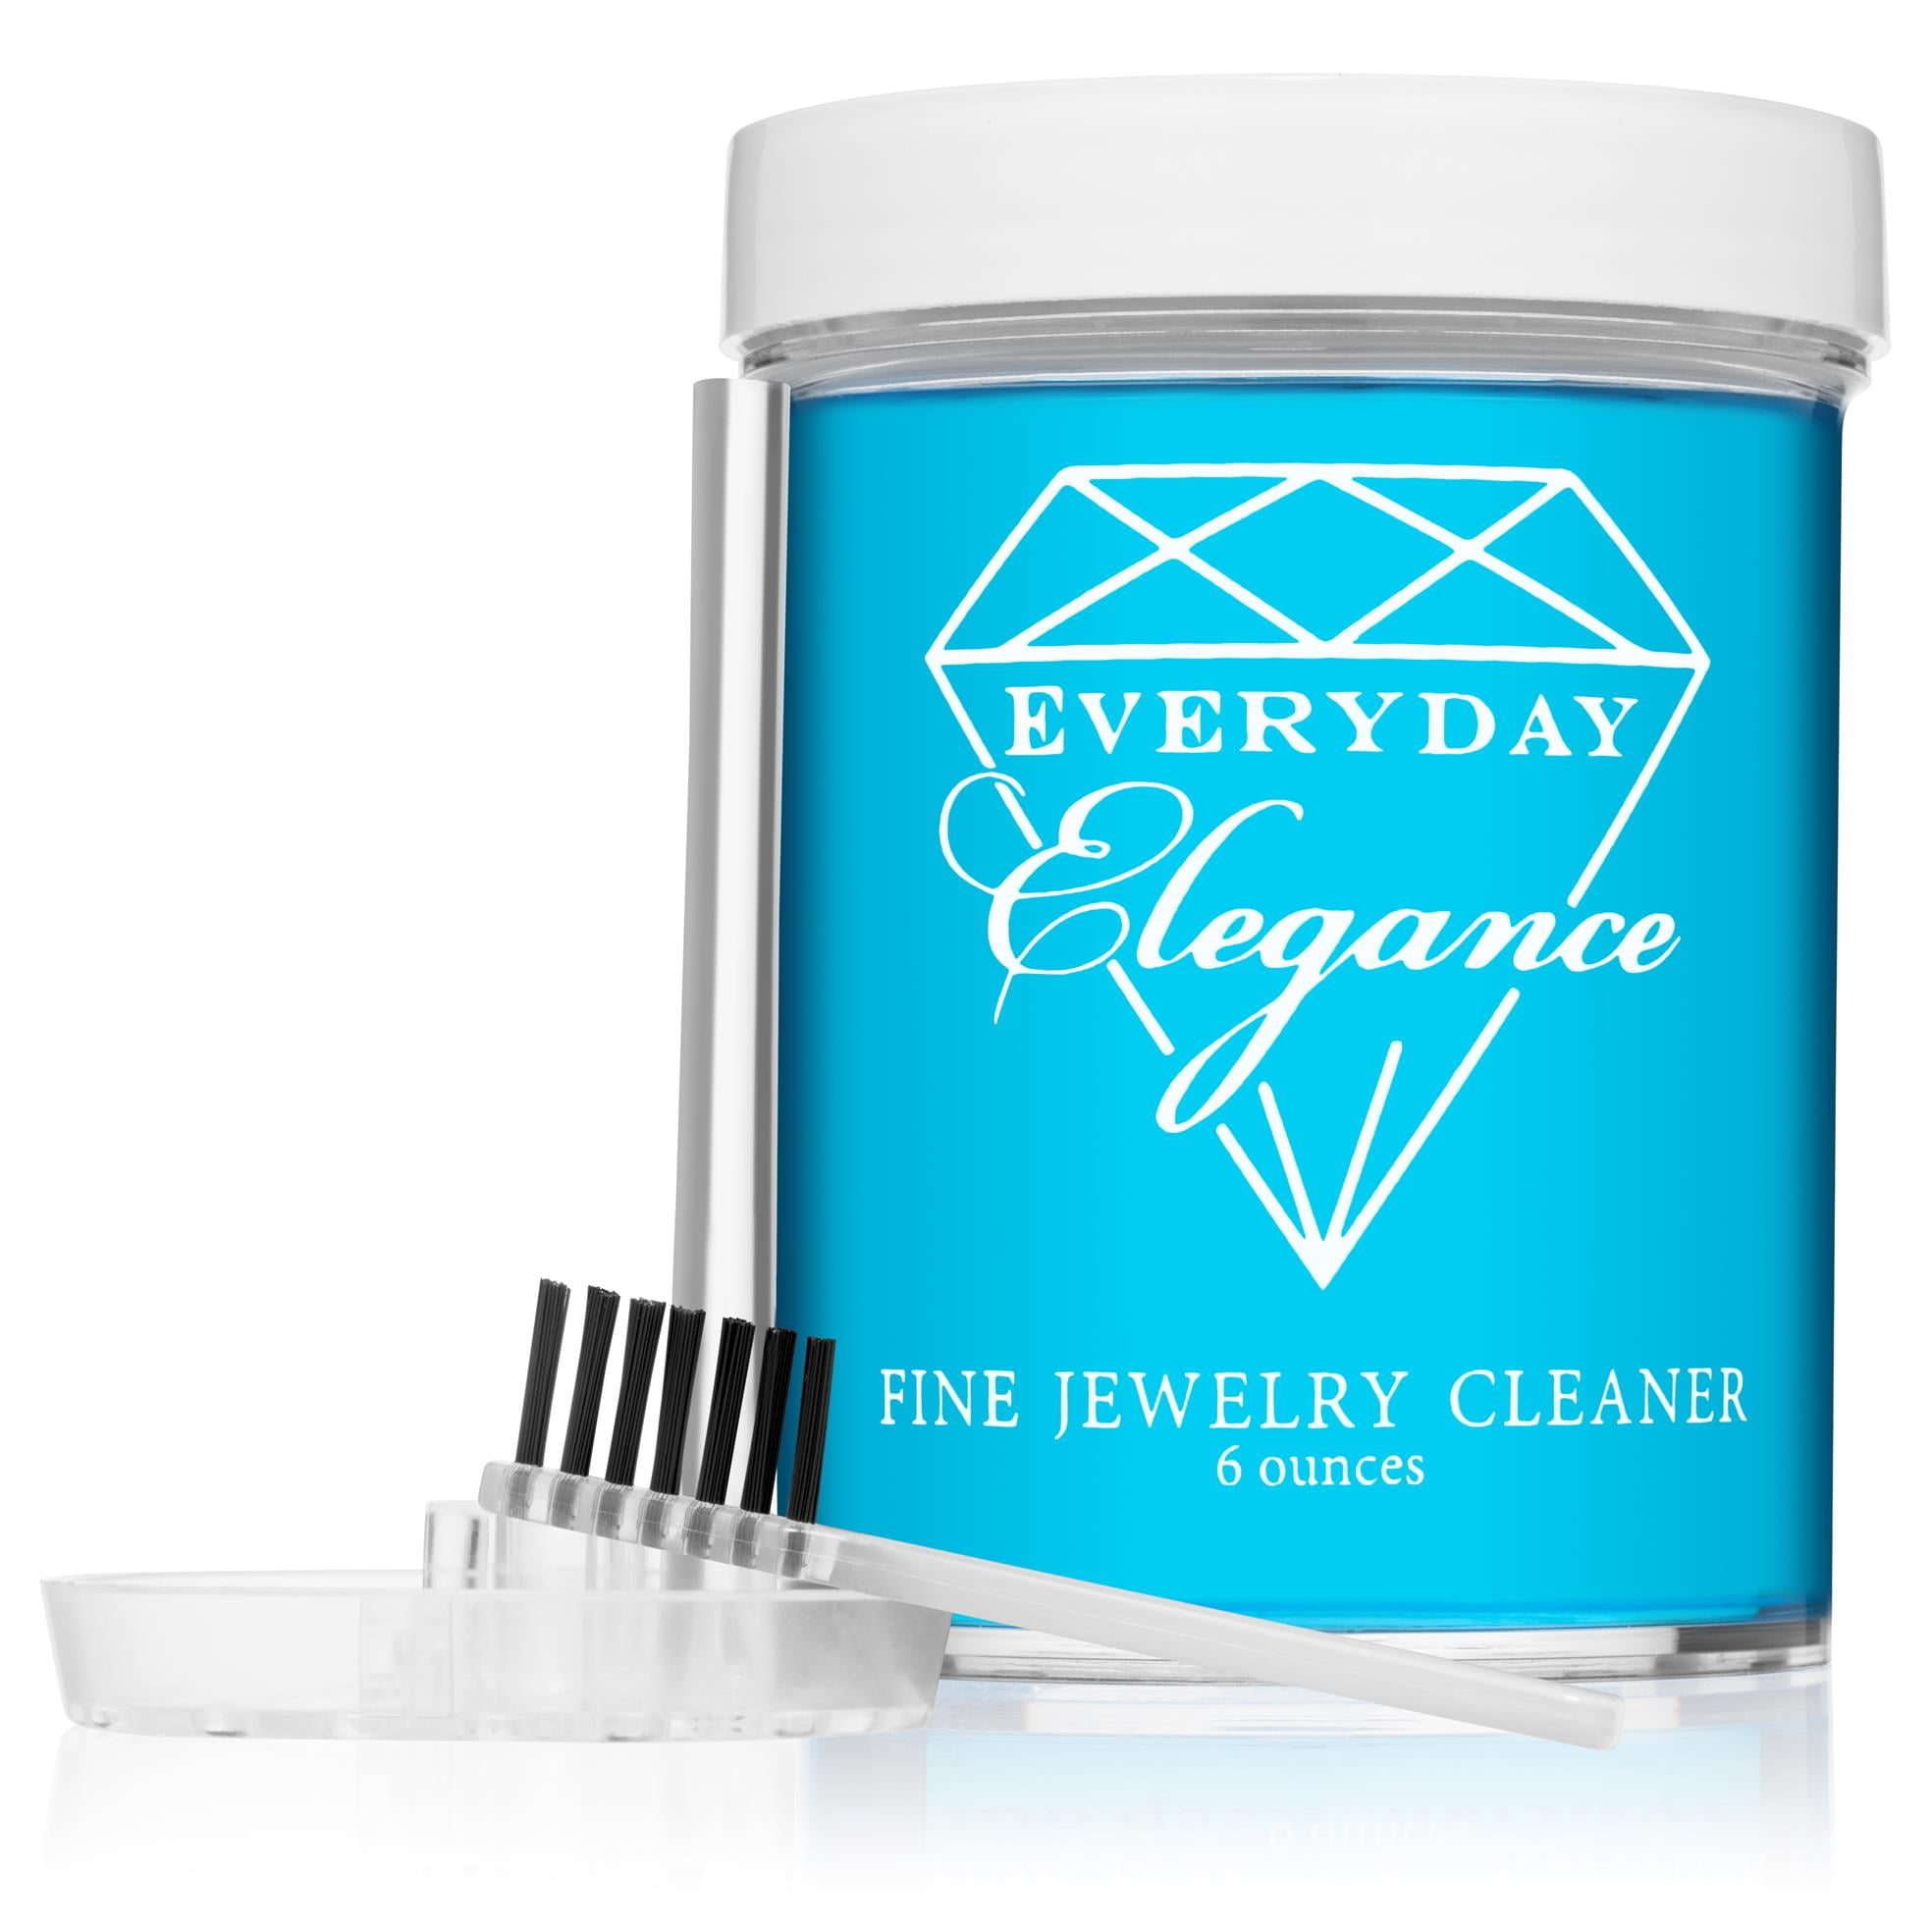 Fine Jewelry Cleaner Liquid Solution to Clean Gold, Platinum and Diamonds  With Brush & Tray | 6 Ounce Jar | Everyday Elegance